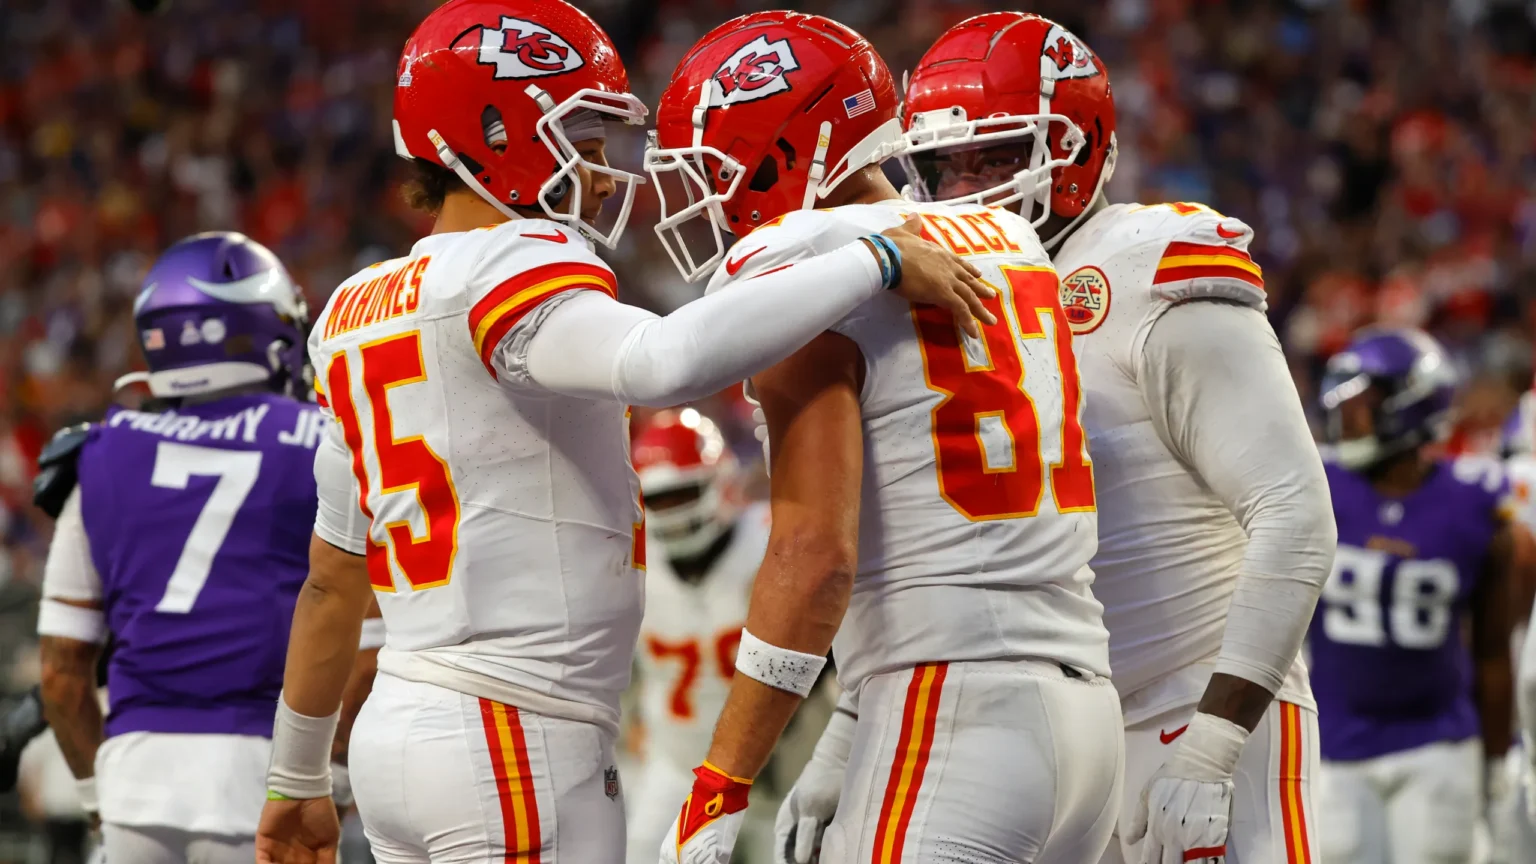 “Patrick Mahomes, en route to Las Vegas, poised for a rare repeat opportunity as they prepare to face the San Francisco 49ers in a Super Bowl rematch from four years ago.”